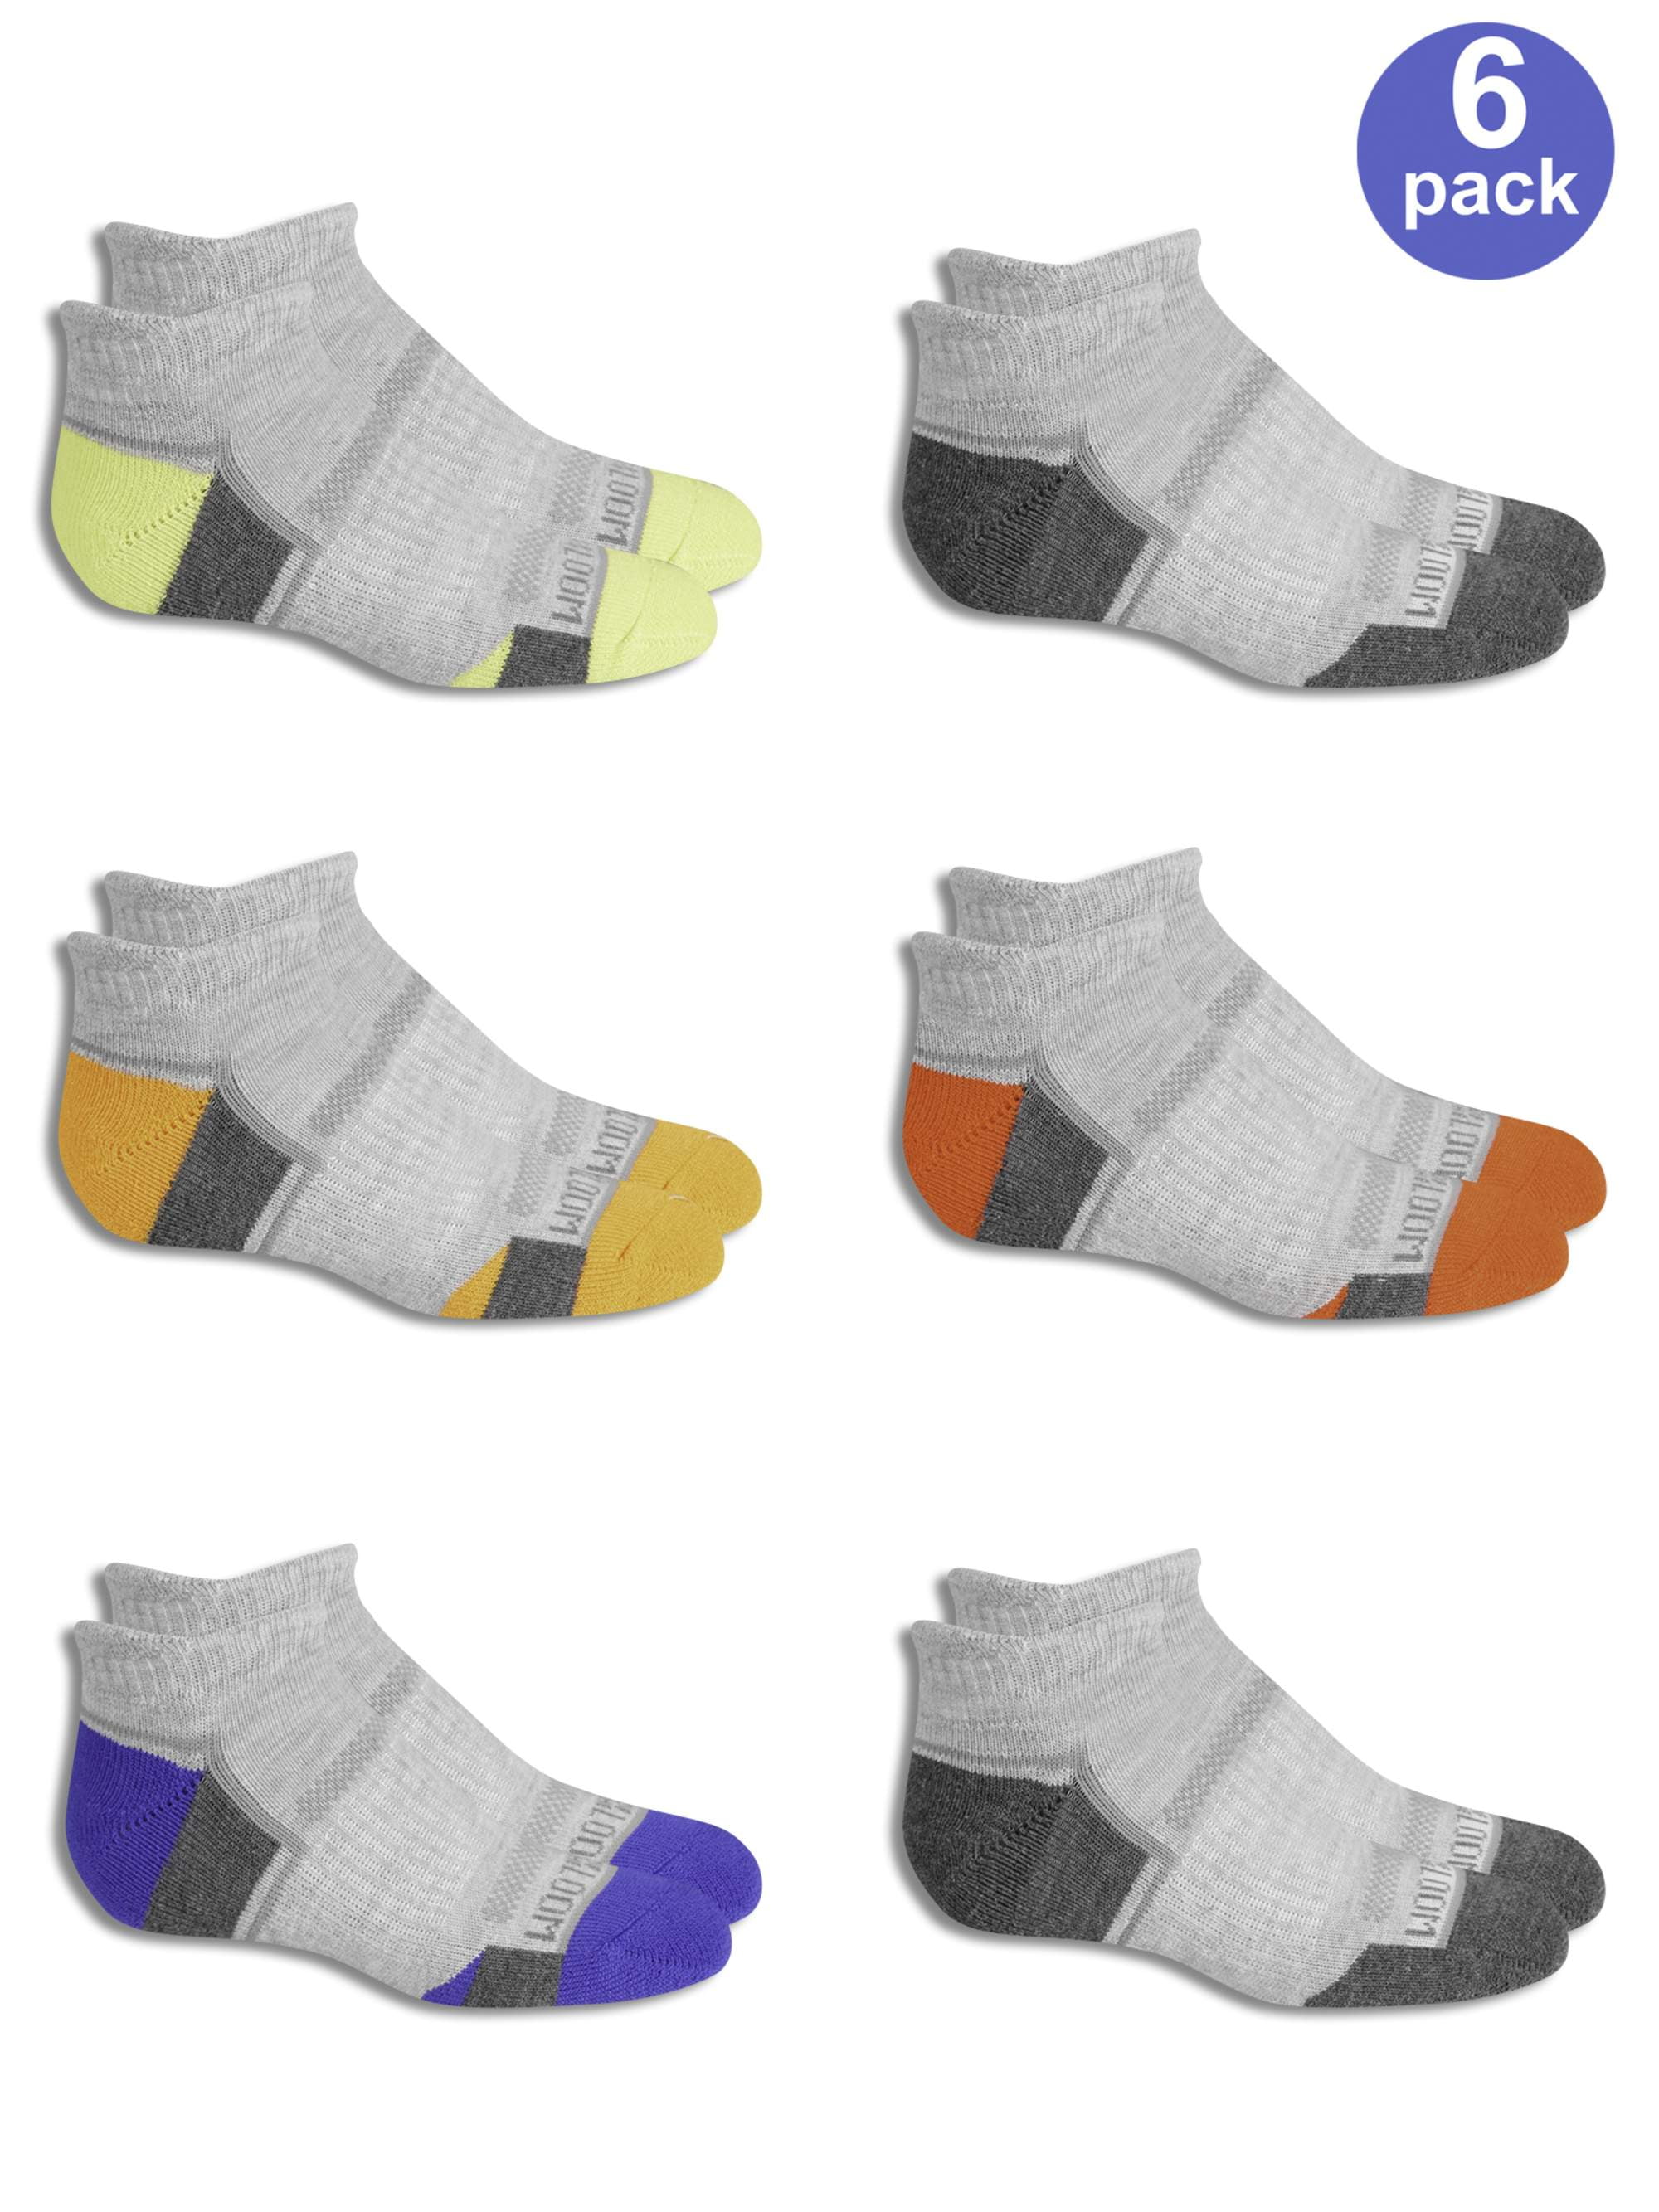 Fruit of the Loom Boys 6 Pack No Show Eveyday Active Socks